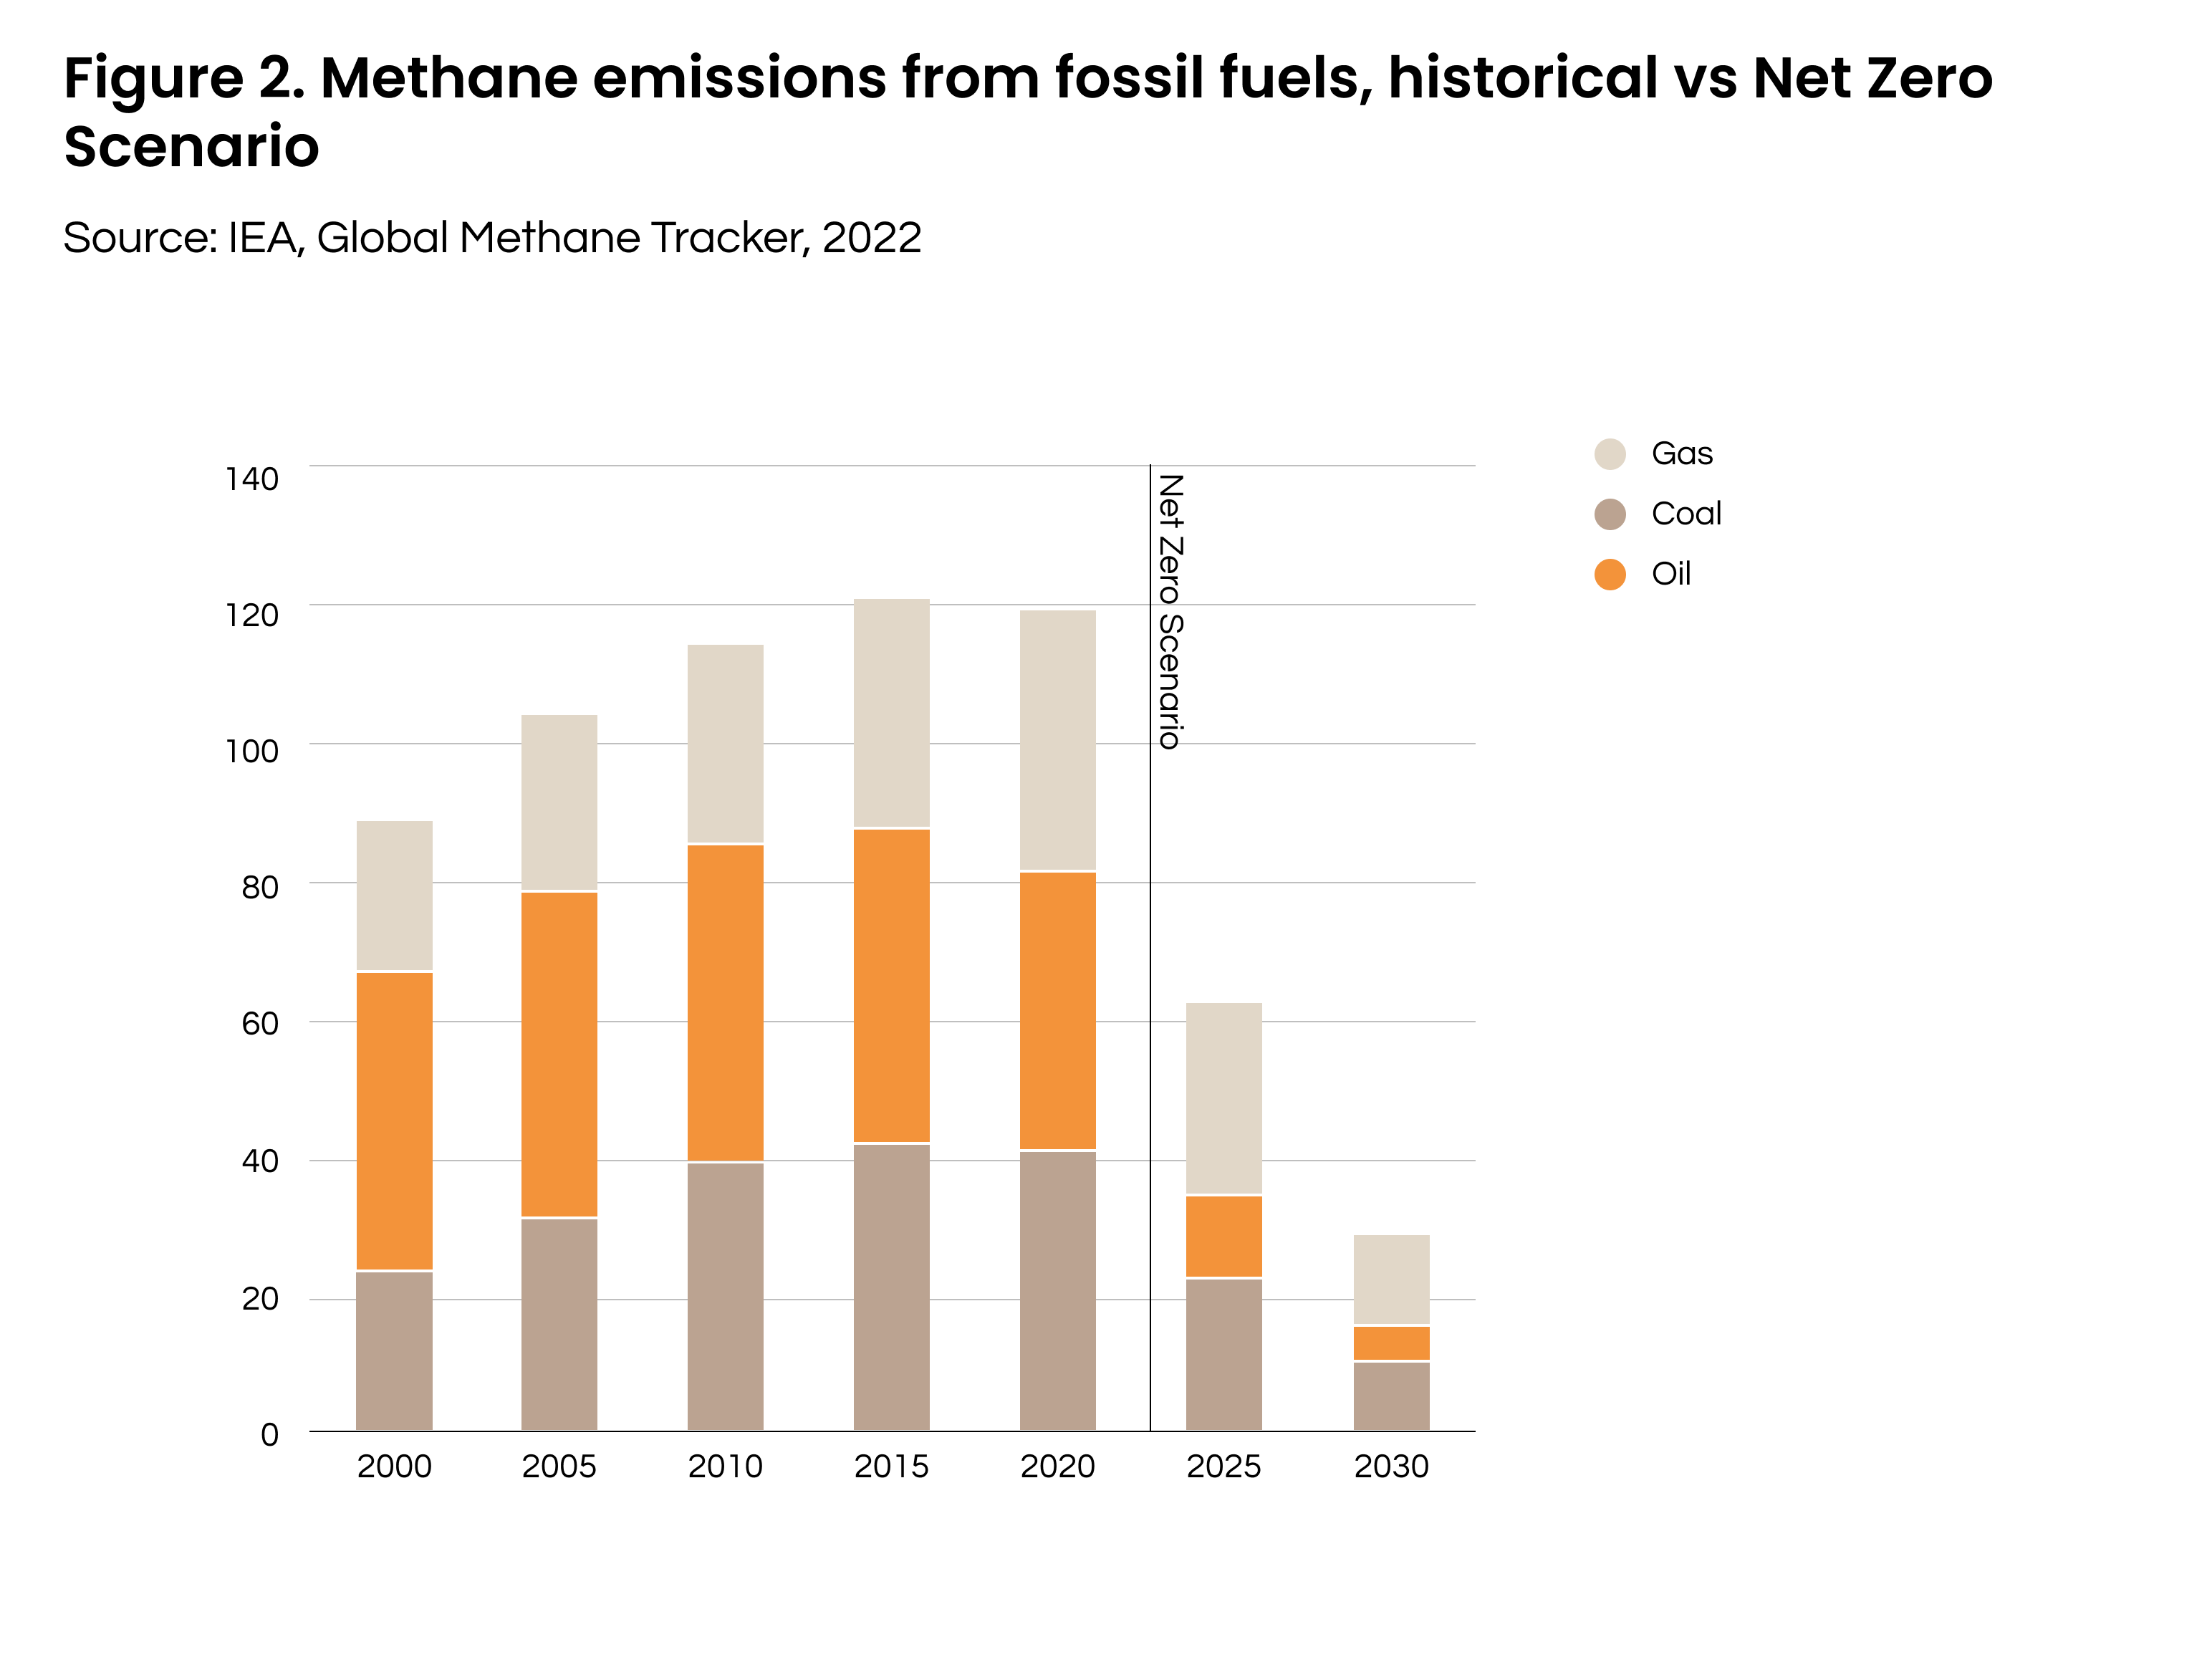 Methane emissions from fossil fuels